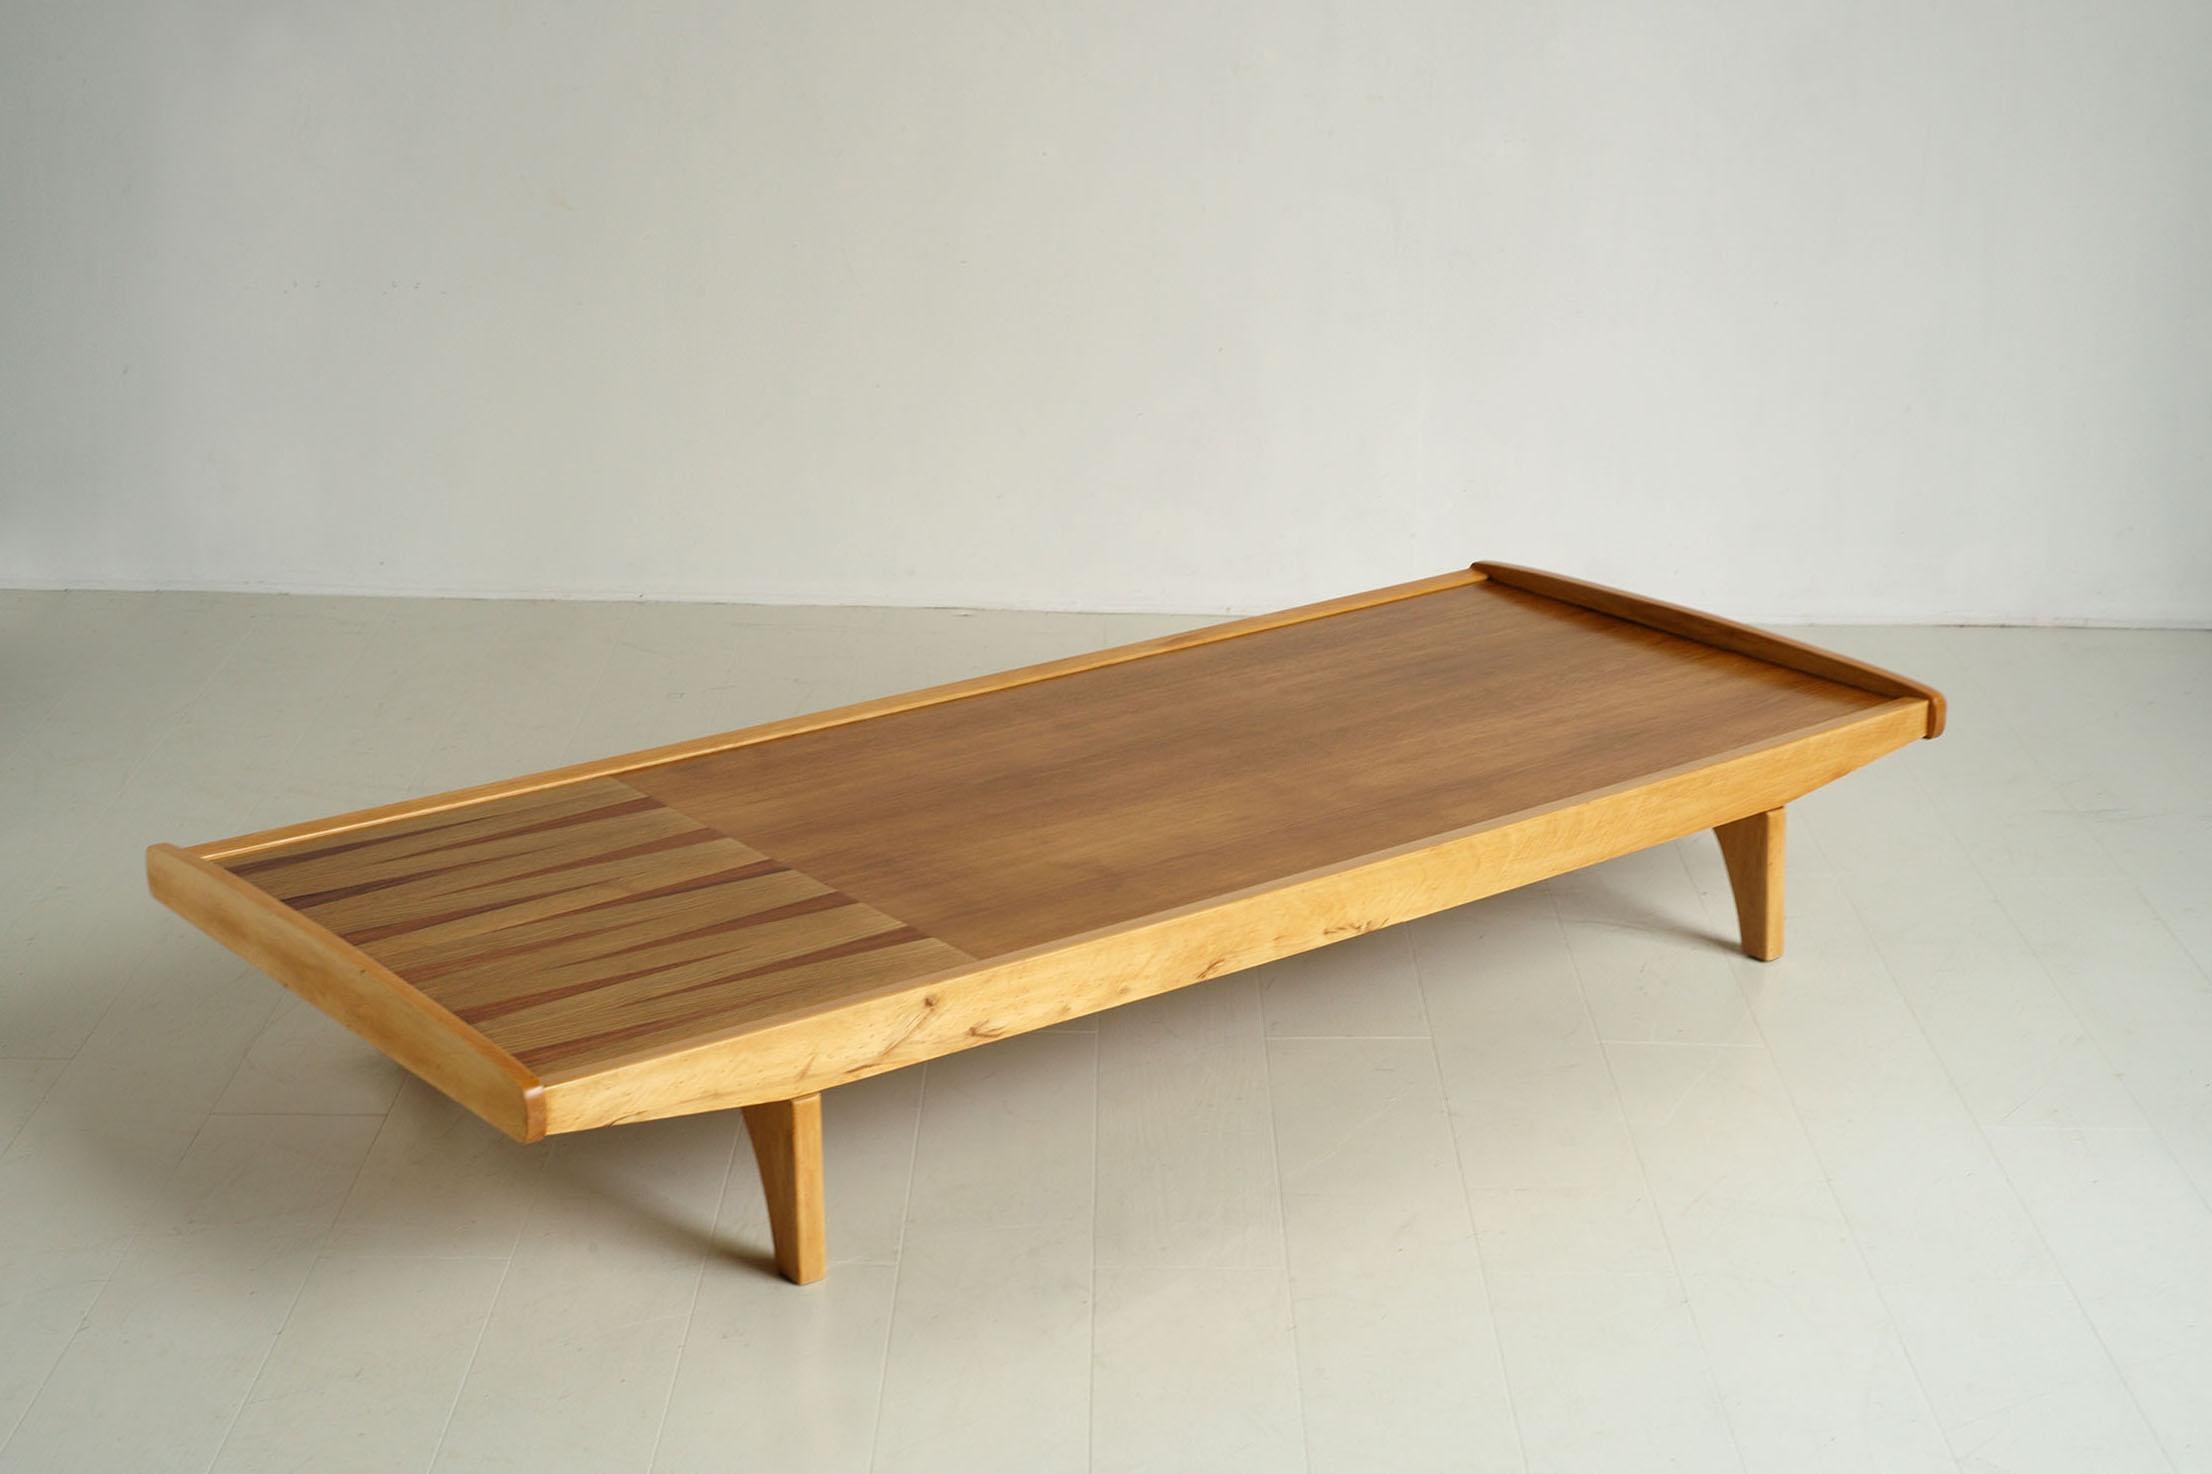 Beech daybed, France 1950. The top consists of an oak veneered part and a shelf inlaid with opposing triangles in light oak and mahogany. The mattress and its two cushions are covered in linen, they can be placed flat to make a bed or as a backrest.